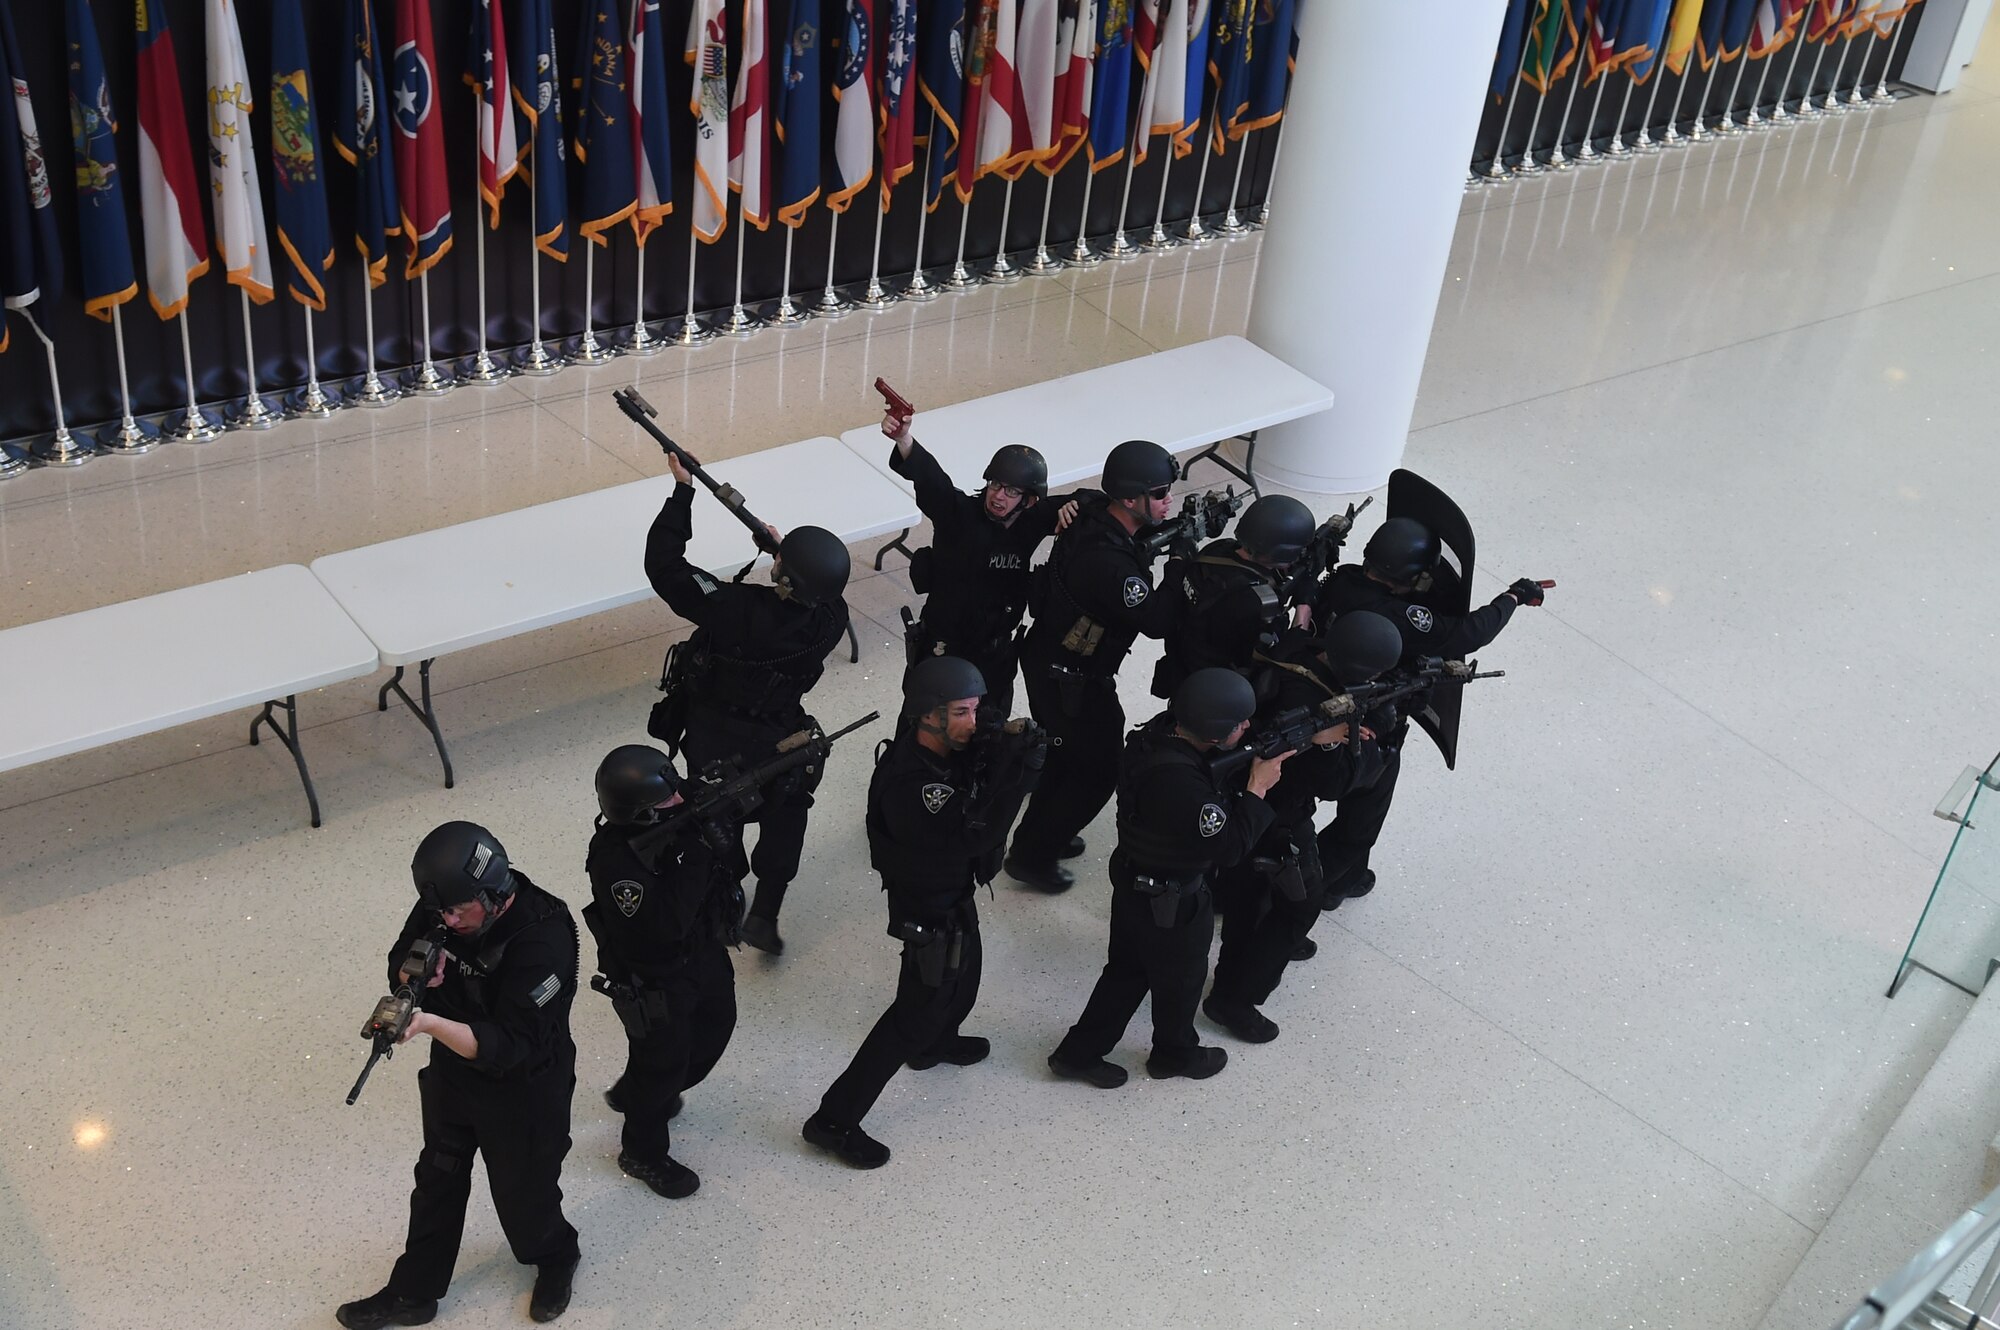 Airmen from the 11th Security Forces Squadron Emergency Services Team at Joint Base Andrews, Md., clear the Air National Guard Readiness Center during an active shooter exercise March 9, 2016. Conducting exercises like these help test installation personnel on the knowledge, skills, abilities and mindset necessary to successfully respond to an active shooter event. (U.S. Air Force photo by Senior Airman Mariah Haddenham/Released)